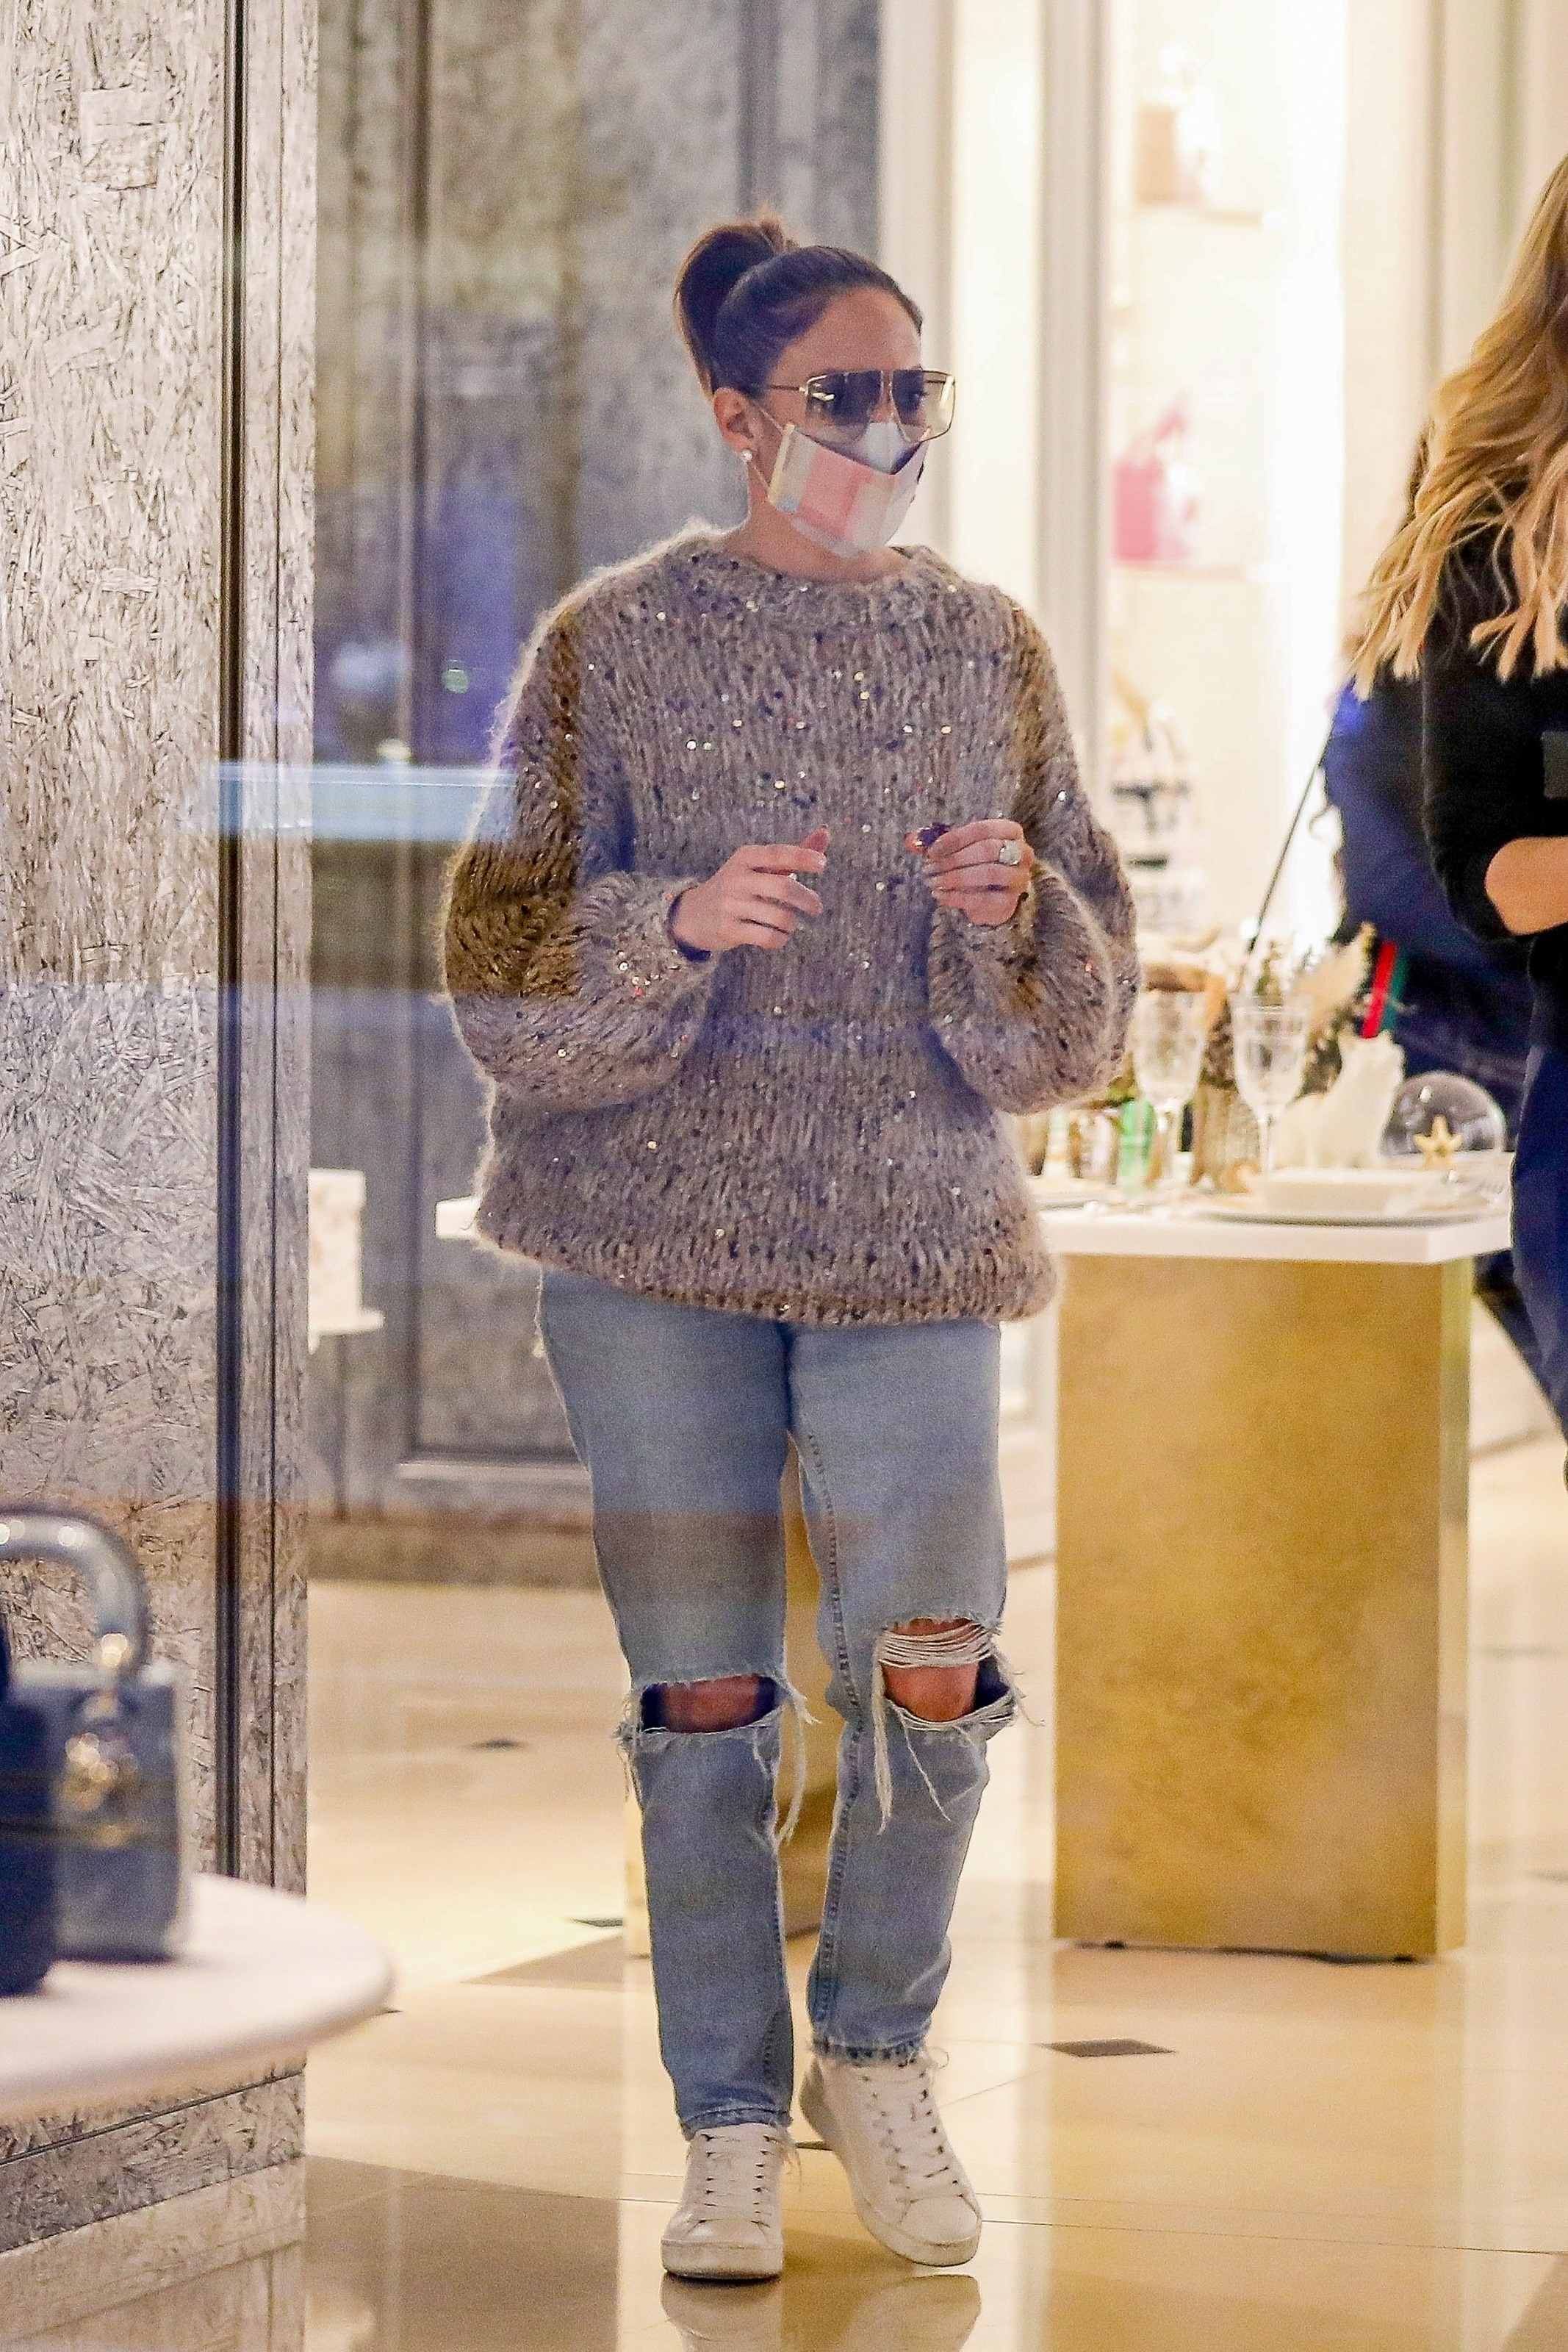 See what J.Lo wears to go Christmas shopping on Rodeo Drive, plus